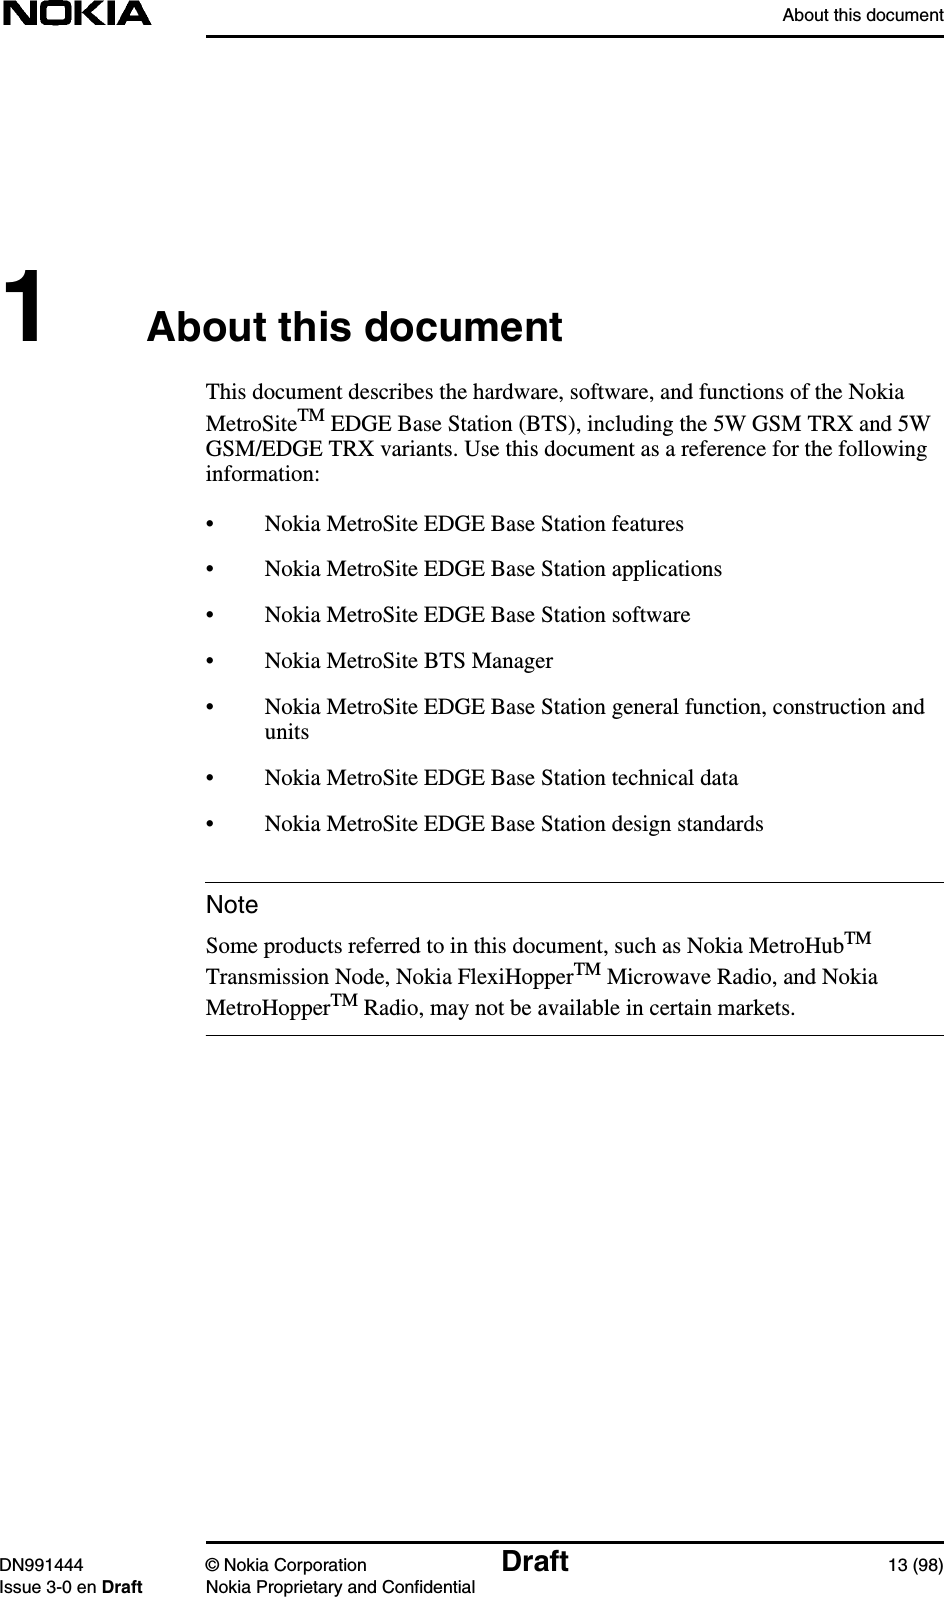 About this documentDN991444 © Nokia Corporation Draft 13 (98)Issue 3-0 en Draft Nokia Proprietary and ConfidentialNote1About this documentThis document describes the hardware, software, and functions of the NokiaMetroSiteTM EDGE Base Station (BTS), including the 5W GSM TRX and 5WGSM/EDGE TRX variants. Use this document as a reference for the followinginformation:• Nokia MetroSite EDGE Base Station features• Nokia MetroSite EDGE Base Station applications• Nokia MetroSite EDGE Base Station software• Nokia MetroSite BTS Manager• Nokia MetroSite EDGE Base Station general function, construction andunits• Nokia MetroSite EDGE Base Station technical data• Nokia MetroSite EDGE Base Station design standardsSome products referred to in this document, such as Nokia MetroHubTMTransmission Node, Nokia FlexiHopperTM Microwave Radio, and NokiaMetroHopperTM Radio, may not be available in certain markets.